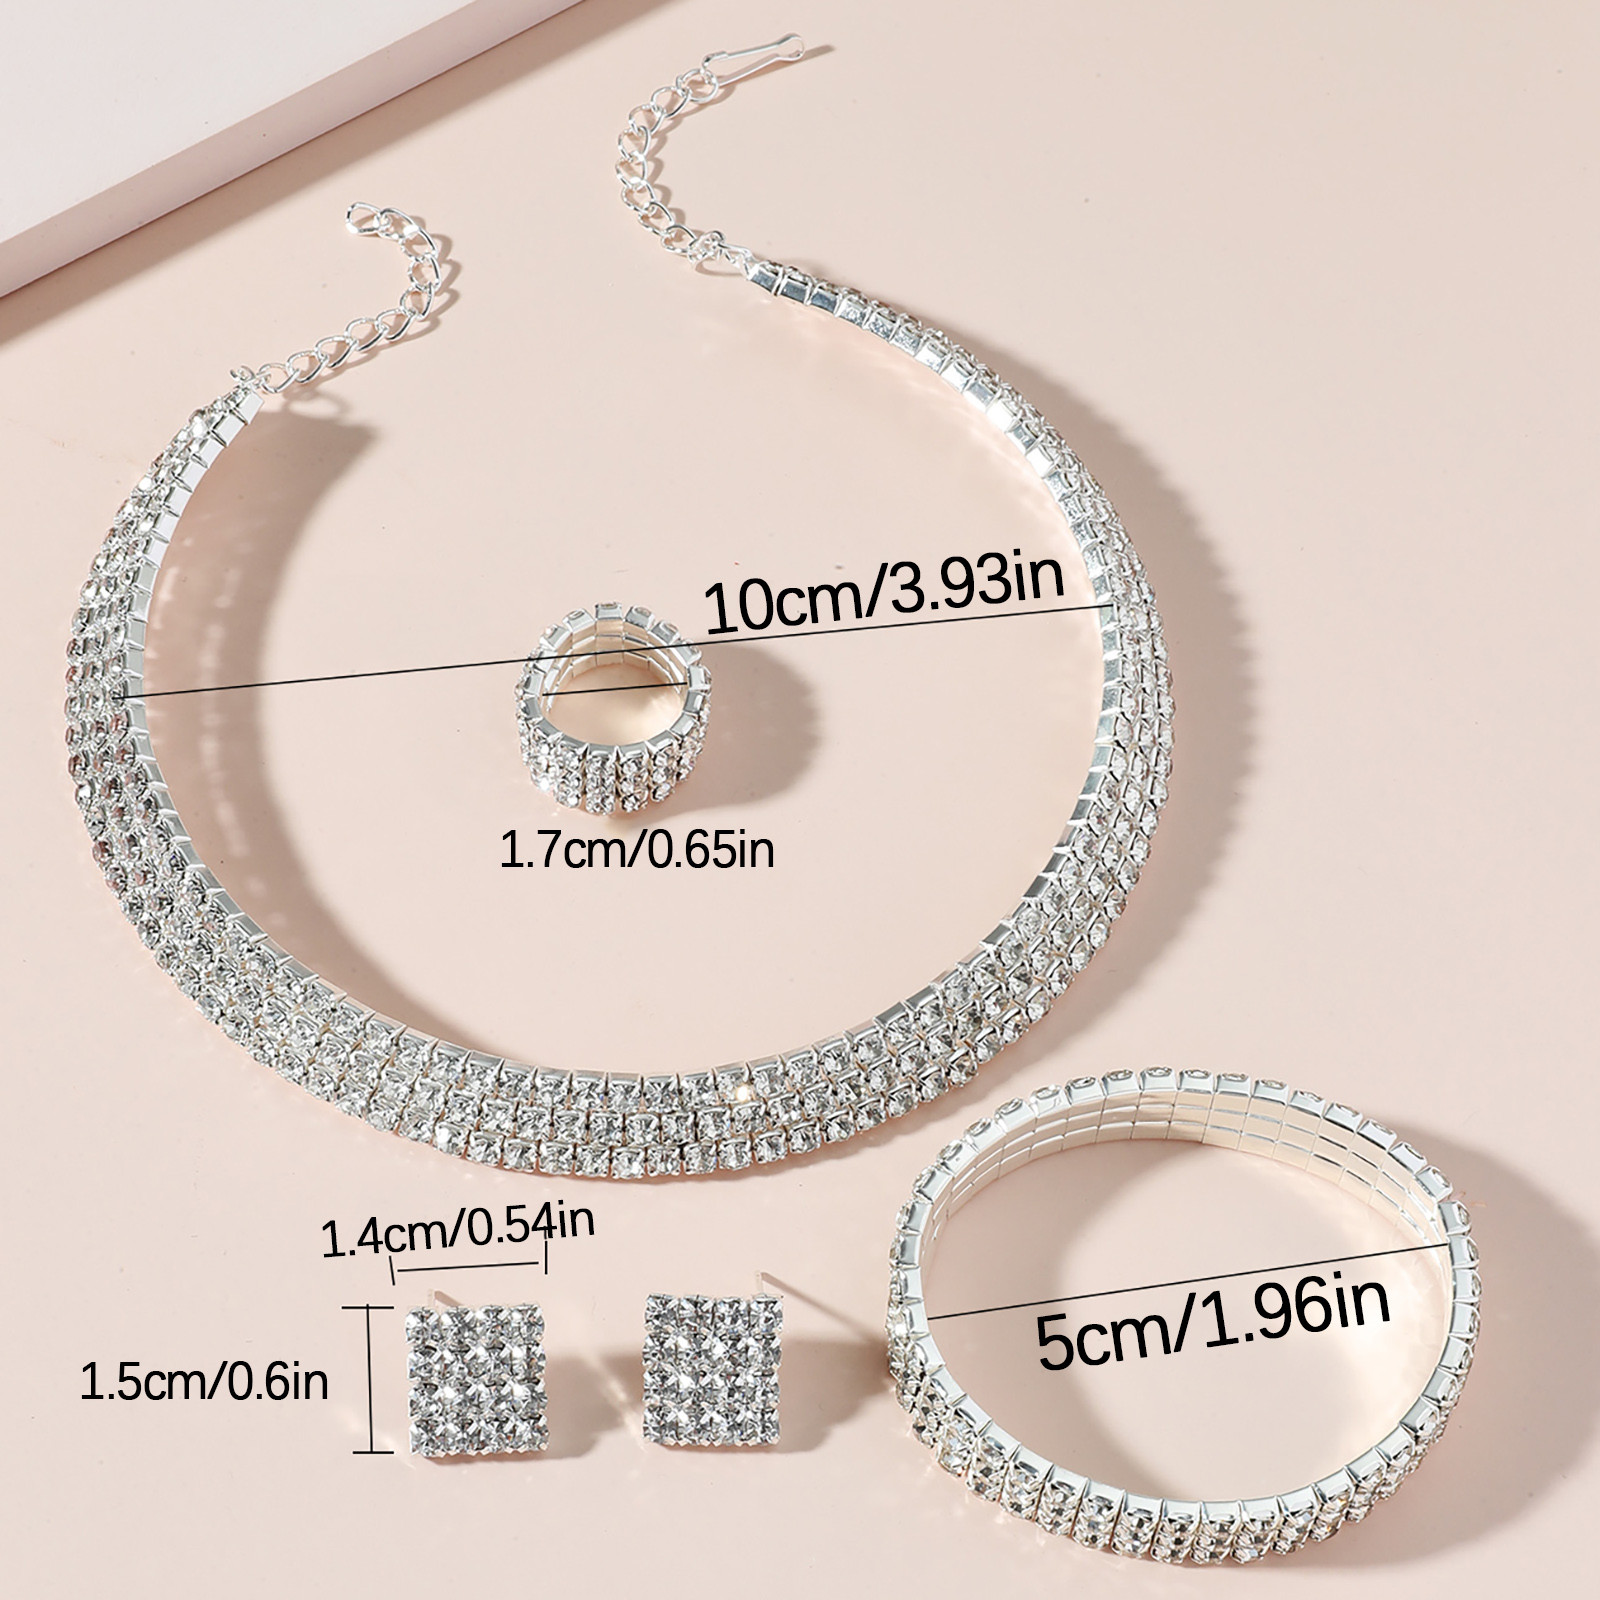 Kayannuo Necklaces for Women Christmas Clearance Women'S Rhinestone Earrings Water Drop Necklace Earrings Set Silver Accessories Birthday Gifts for Women - image 4 of 6